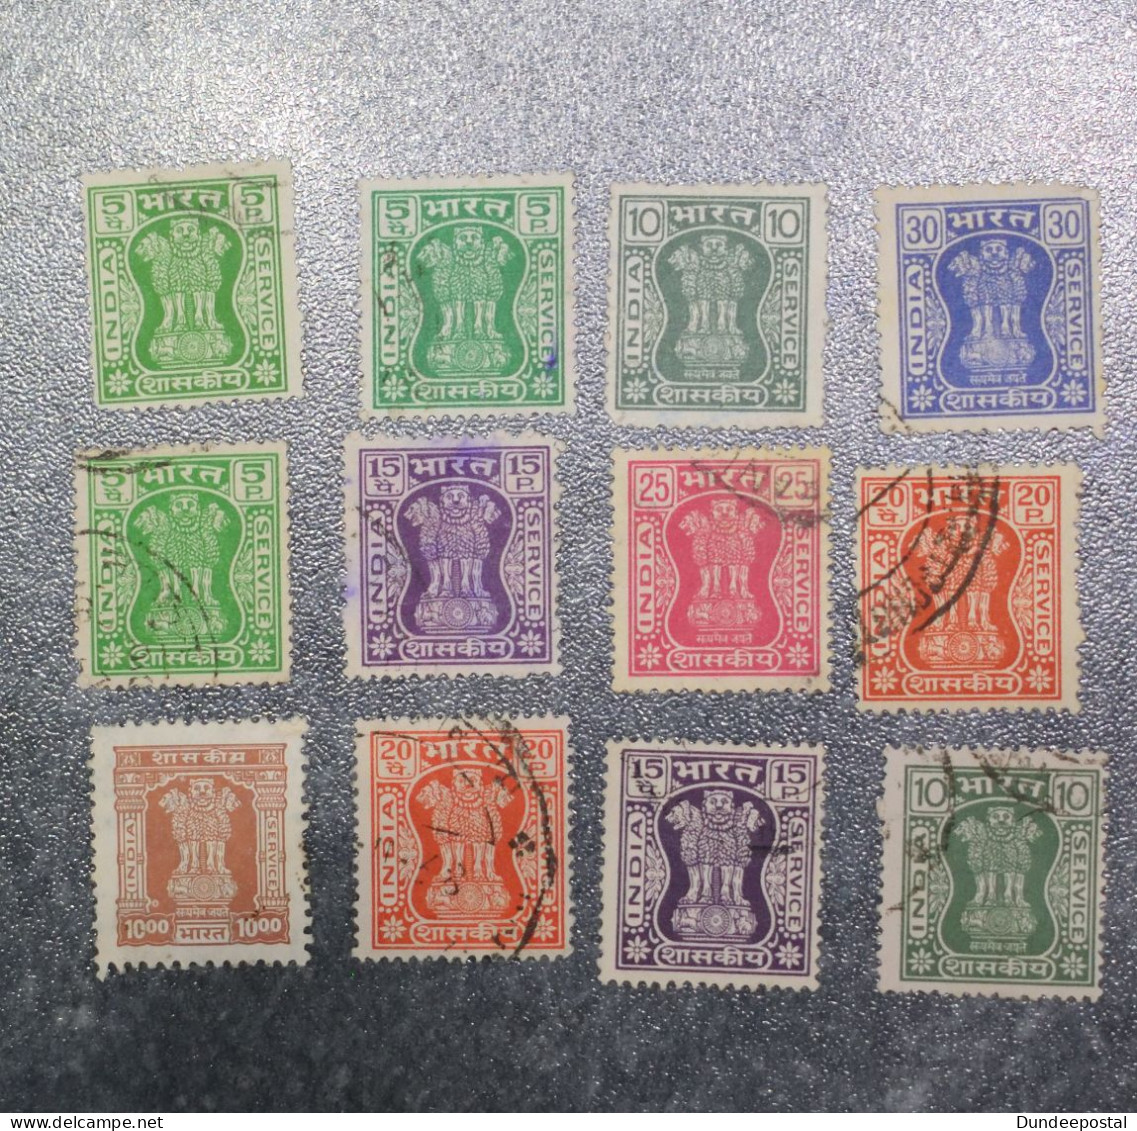 INDIA  STAMPS  Coms 1967 ->    (N25)   ~~L@@K~~ - Used Stamps